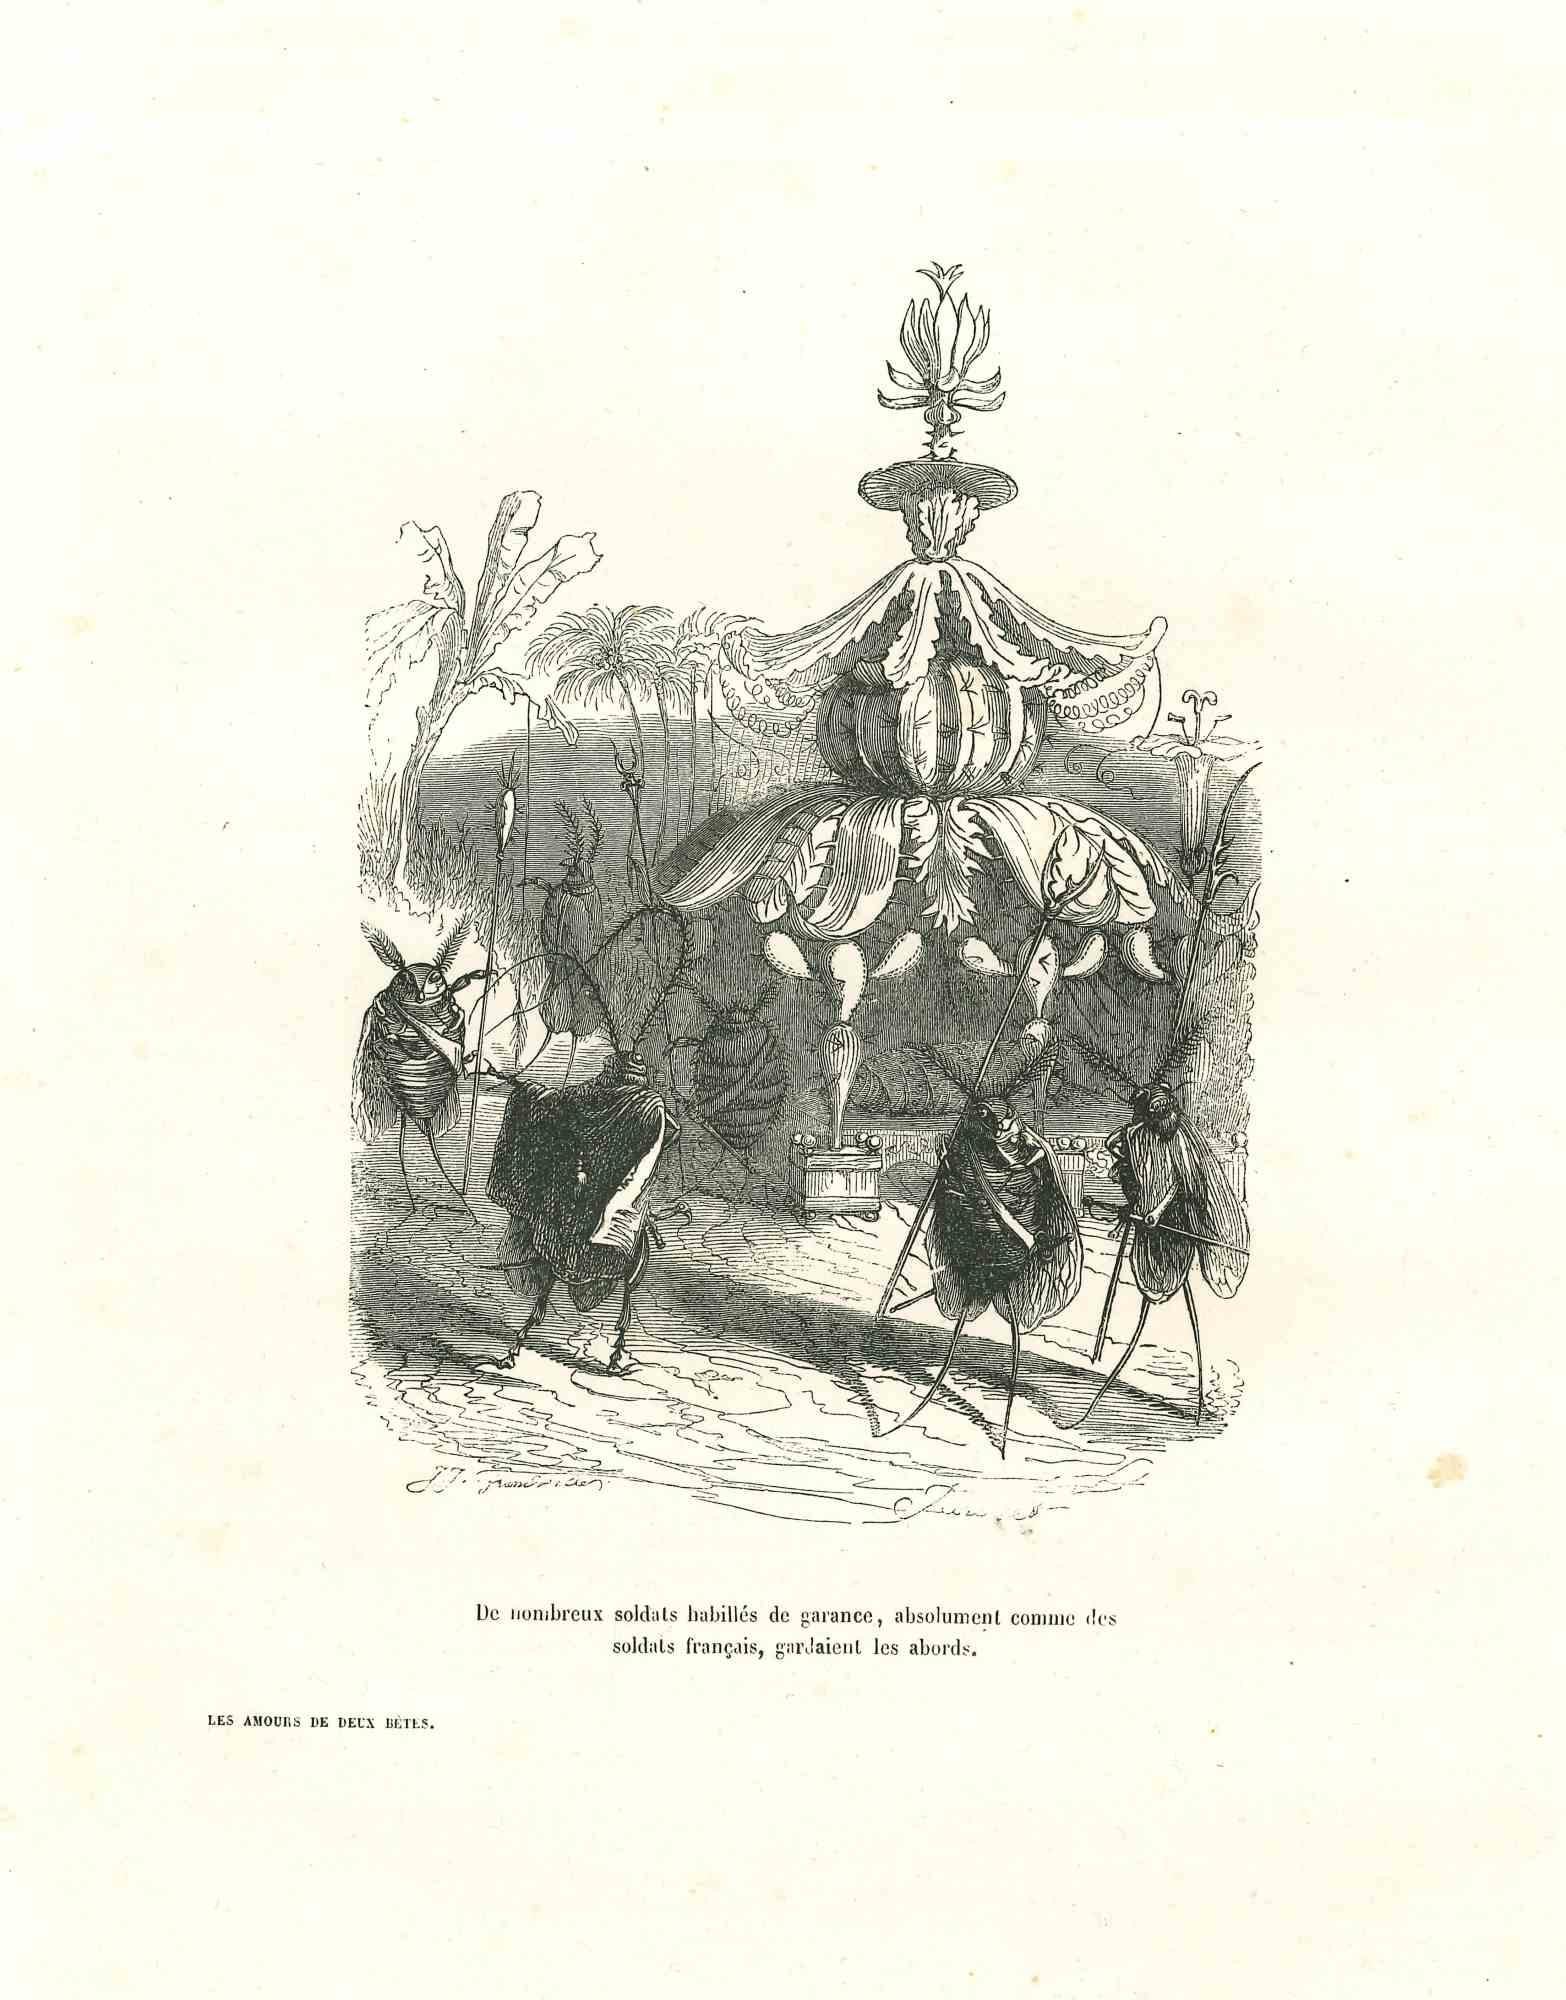 Jean Jeacques Grandville Animal Print - Flies Soldiers Guarding In The Wood - Lithograph by J.J Grandville - 1852